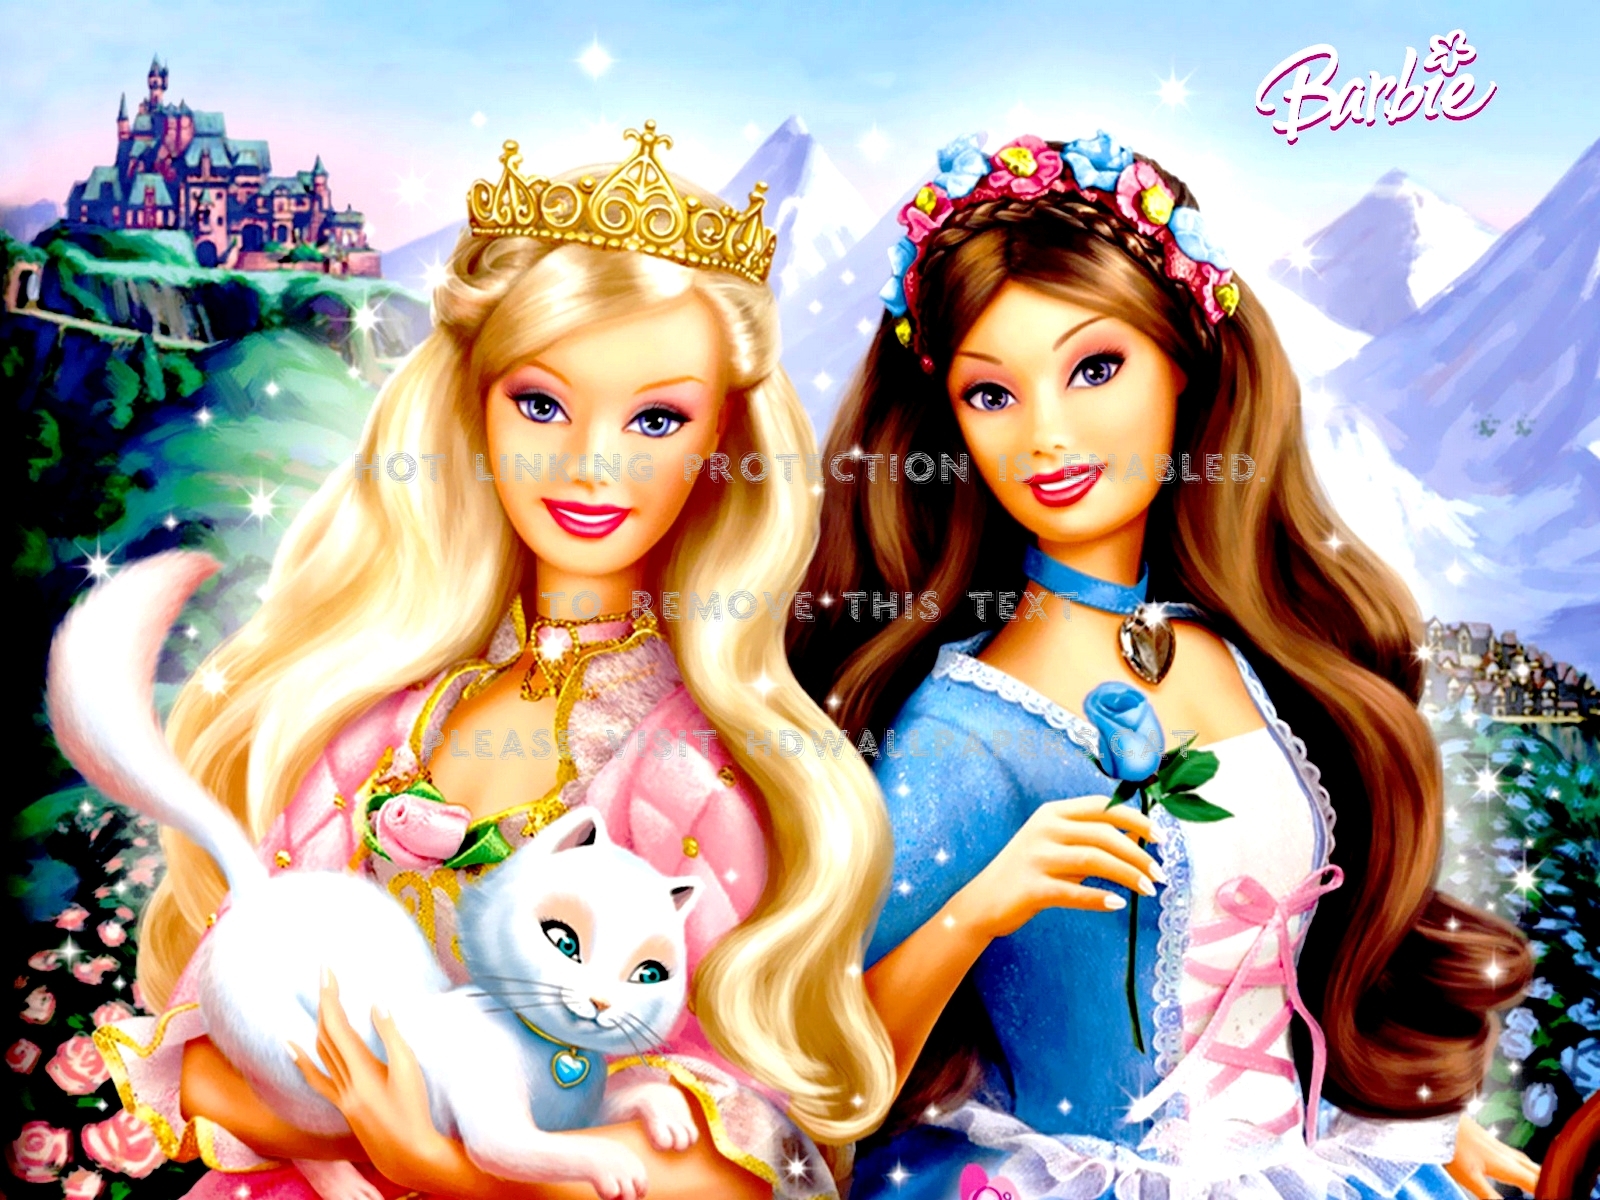 Lovely Barbie Photo Cartoon Abstract 3d And - Barbie 3d - 1600x1200  Wallpaper 